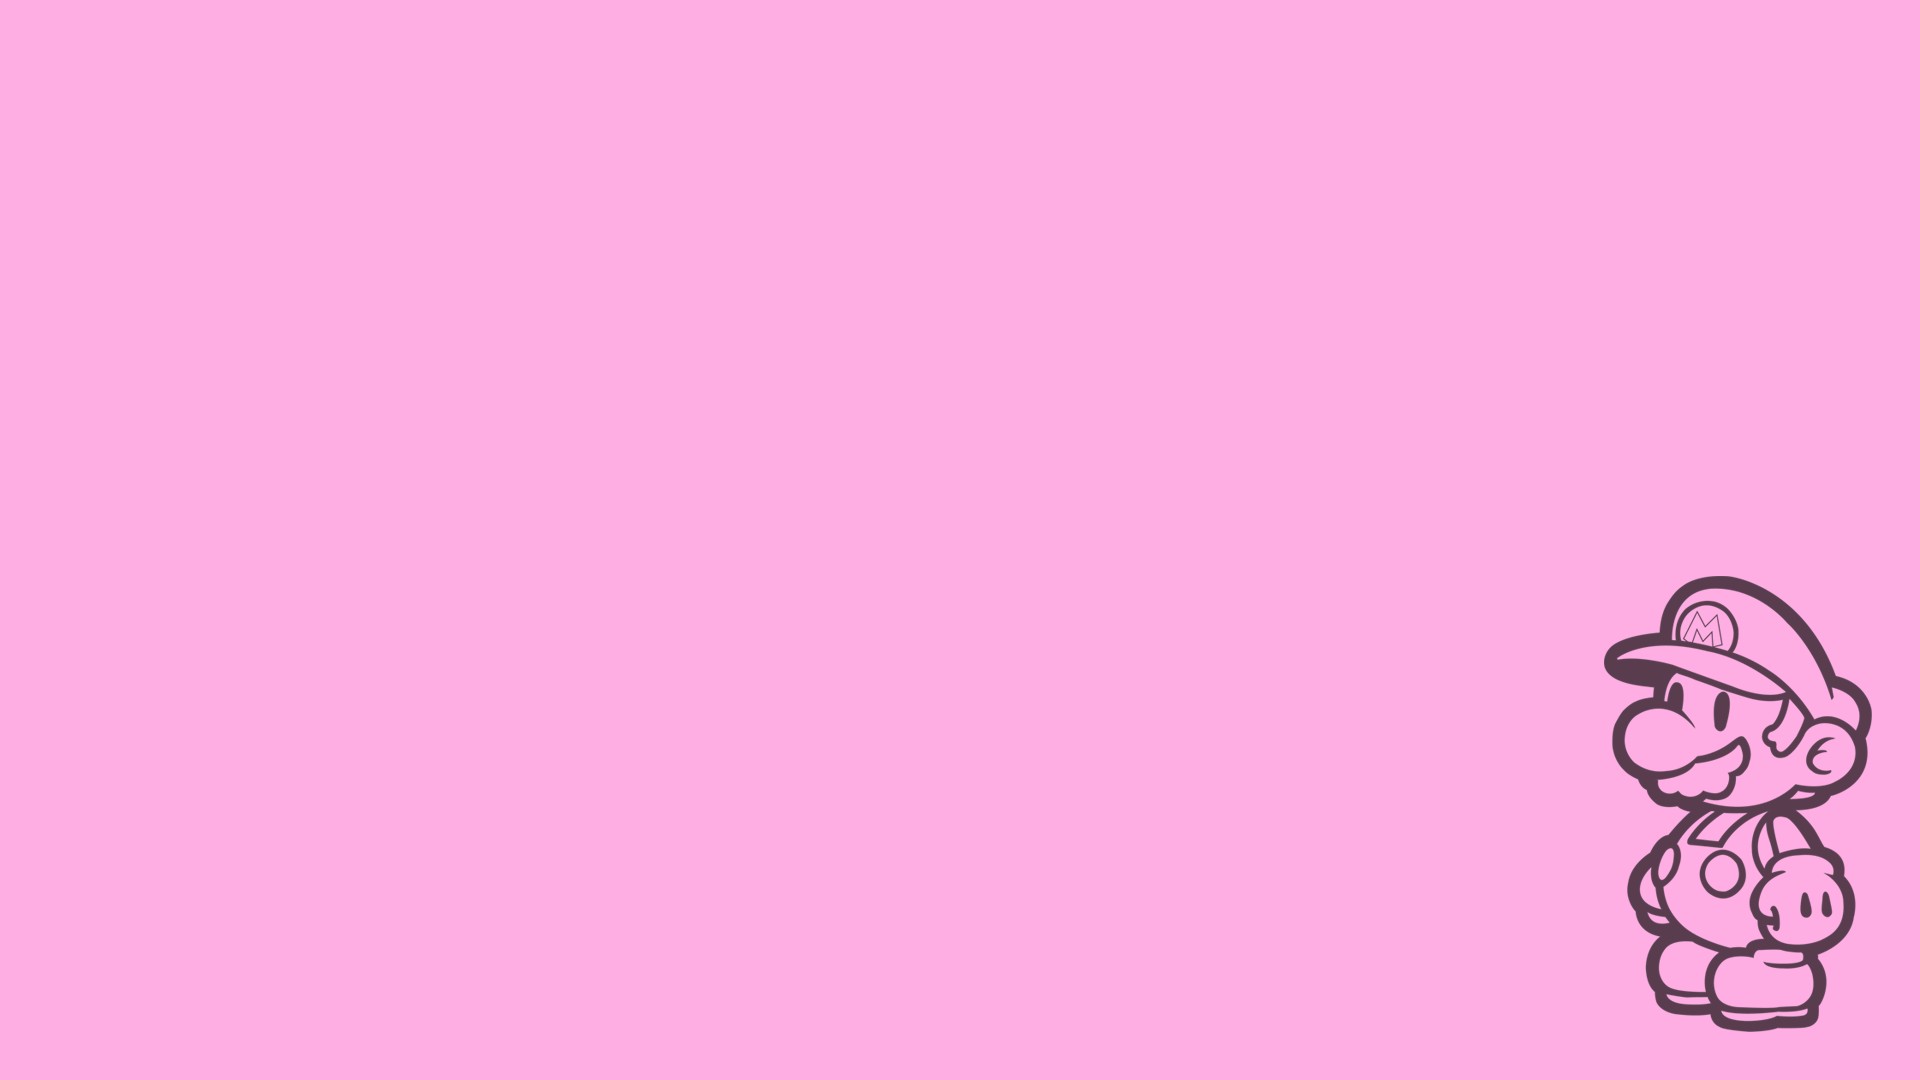 video game characters, Simple, Simple background, Minimalism, Pink